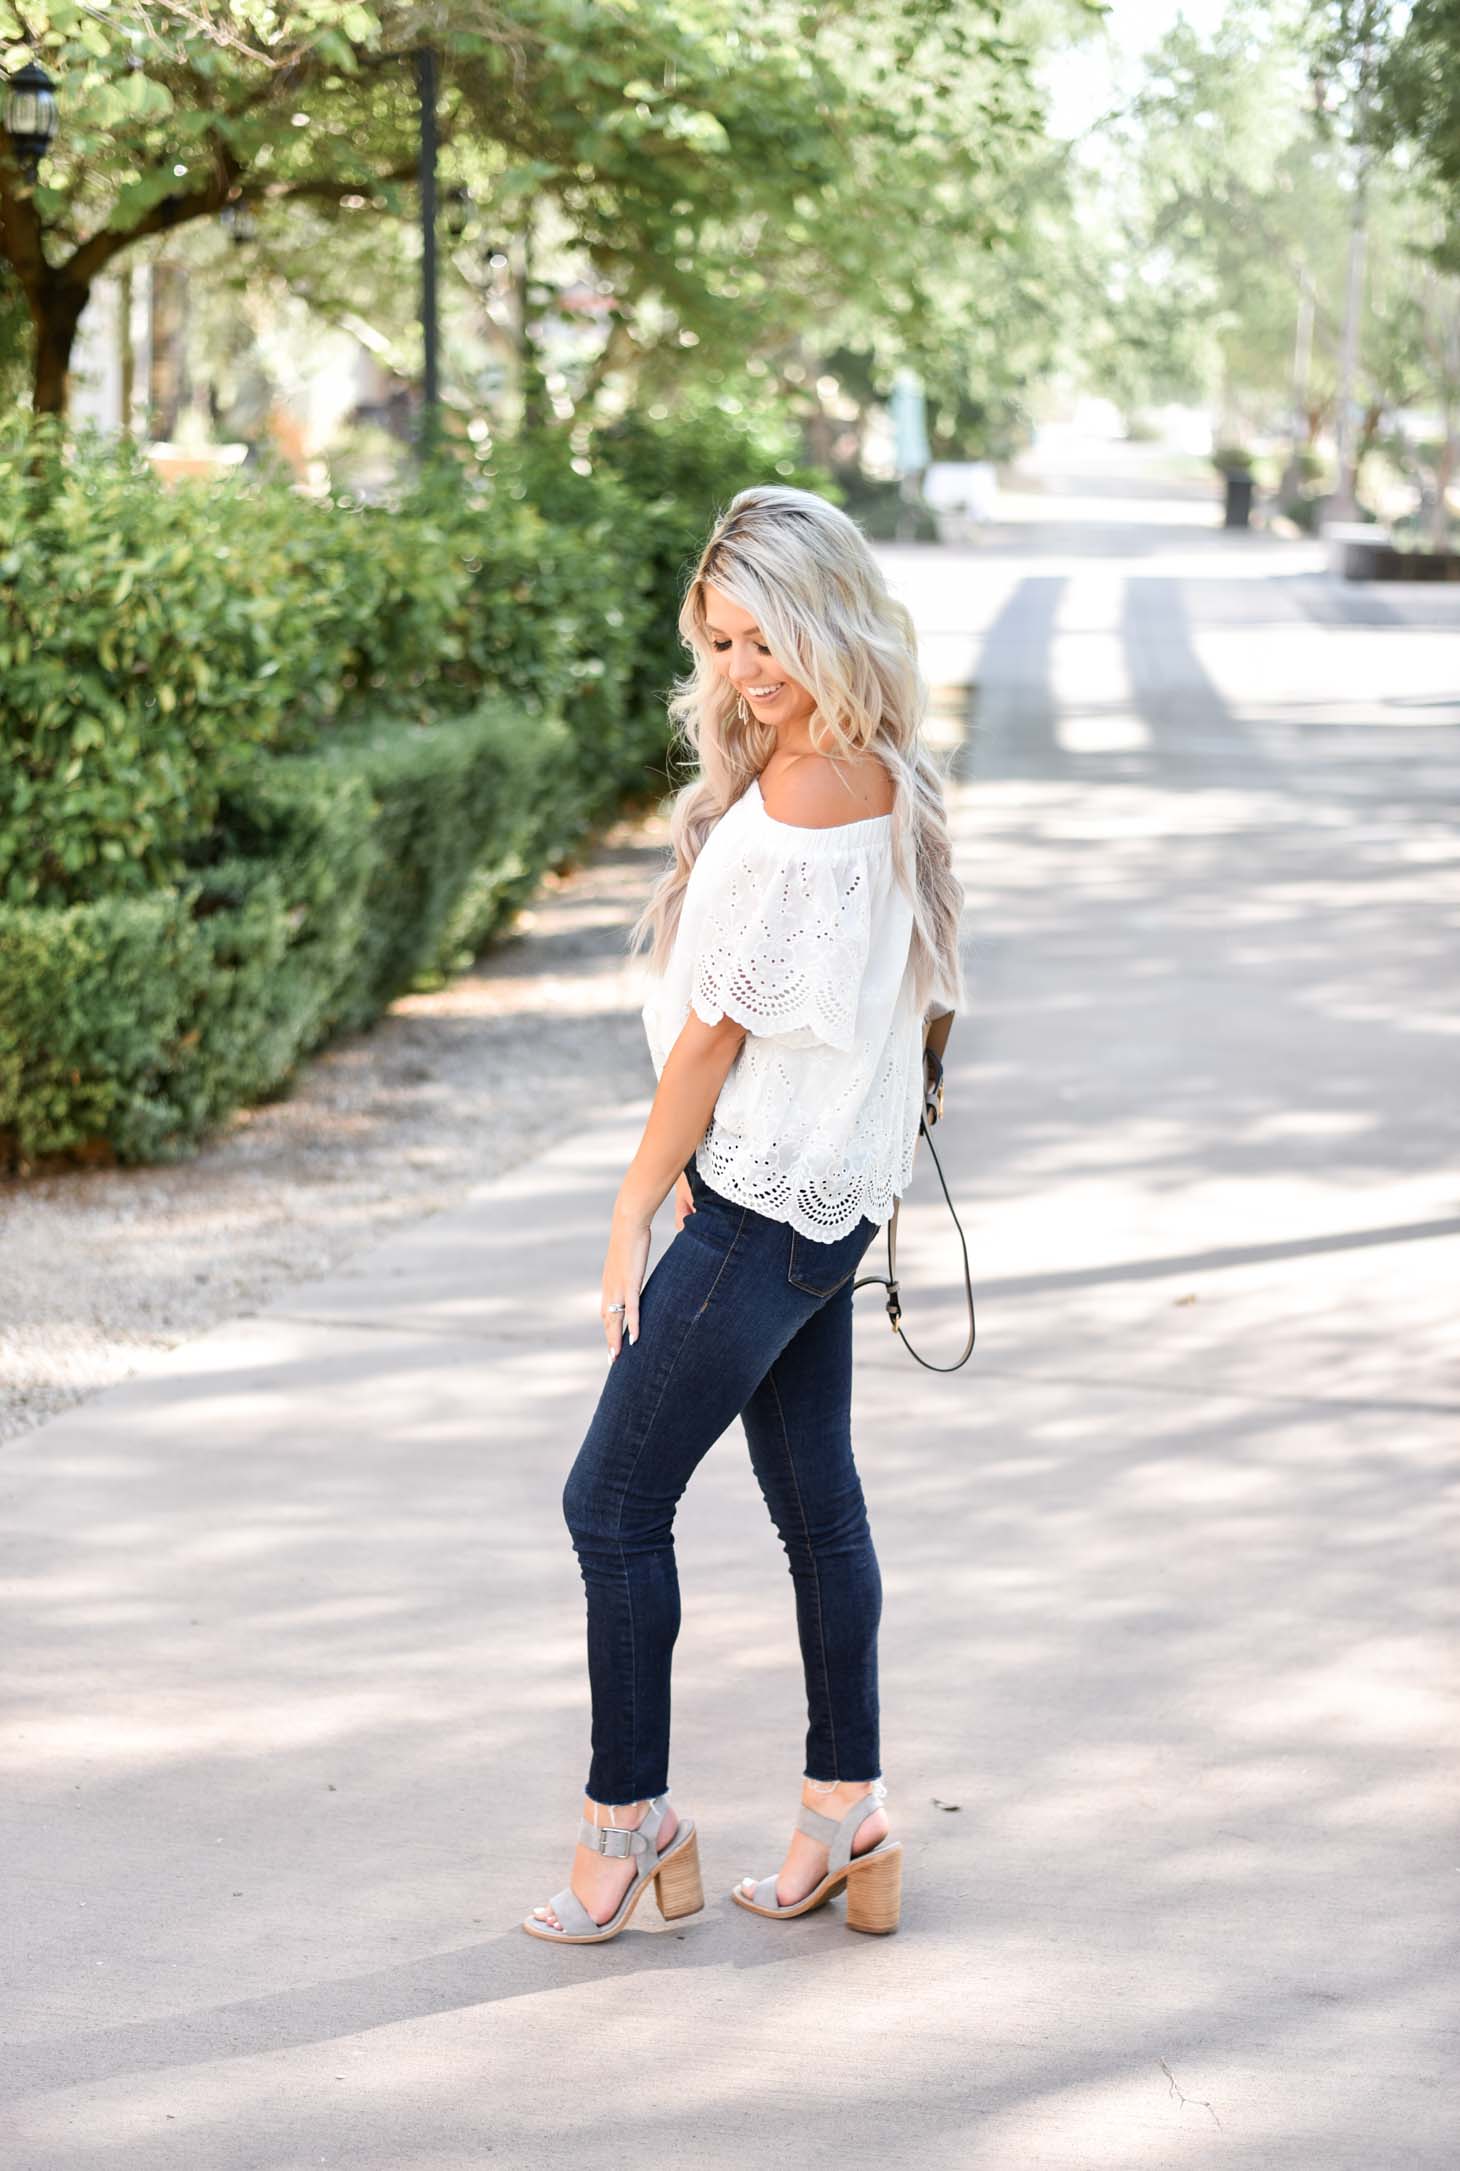 Erin Elizabeth of Wink and a Twirl shares the cutest white eyelet off the shoulder top from Jess Lea Boutique